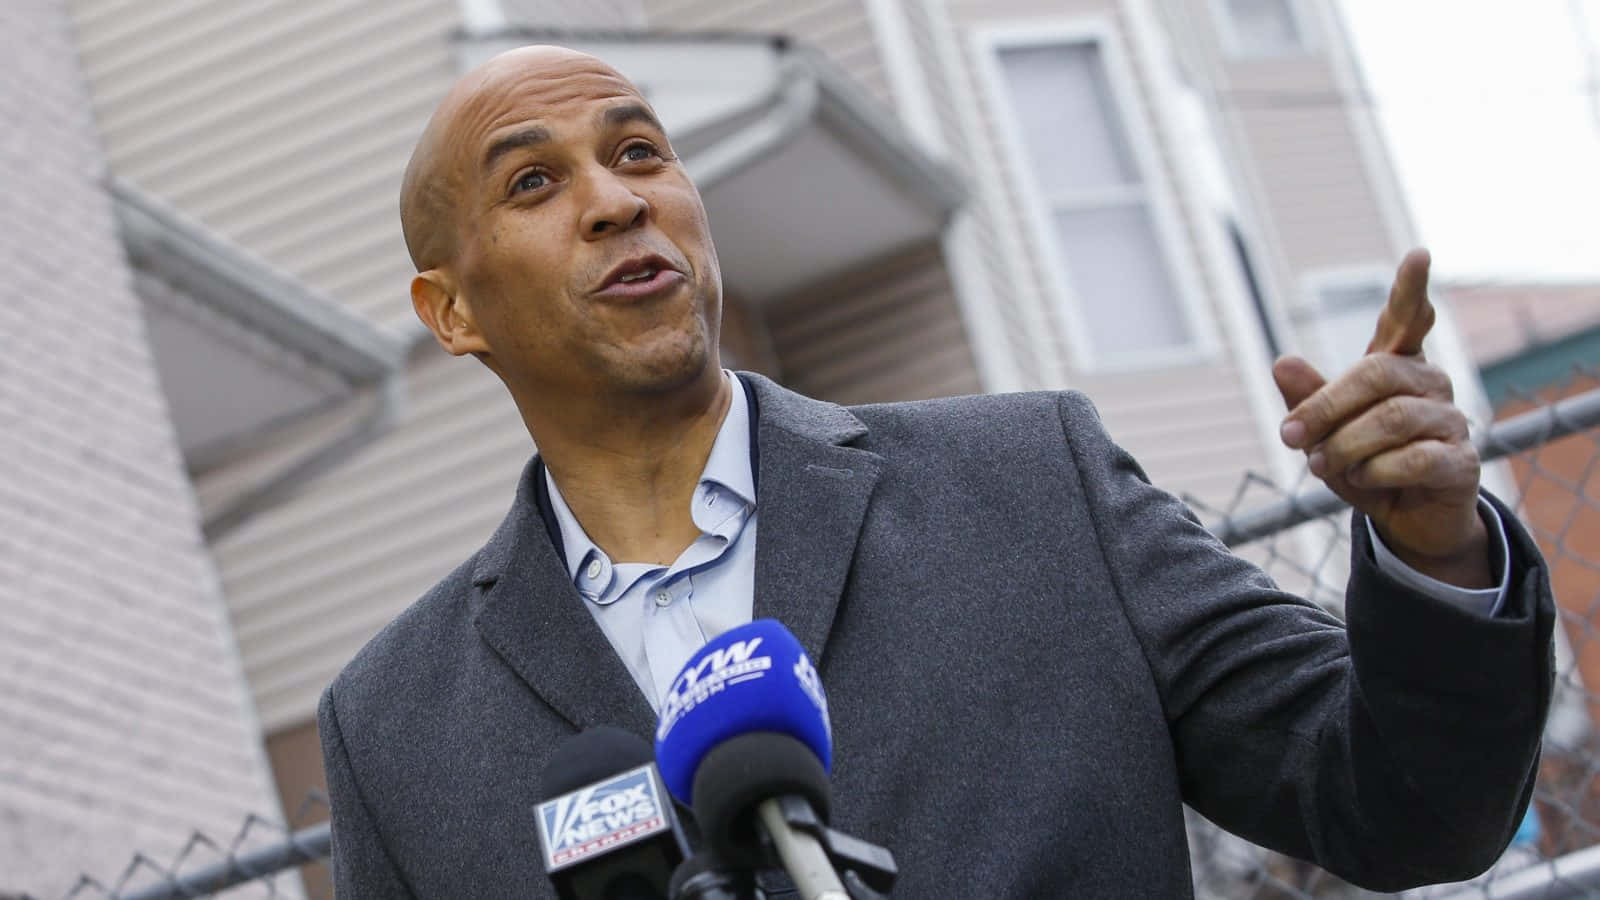 Cory Booker With Fox News Wallpaper